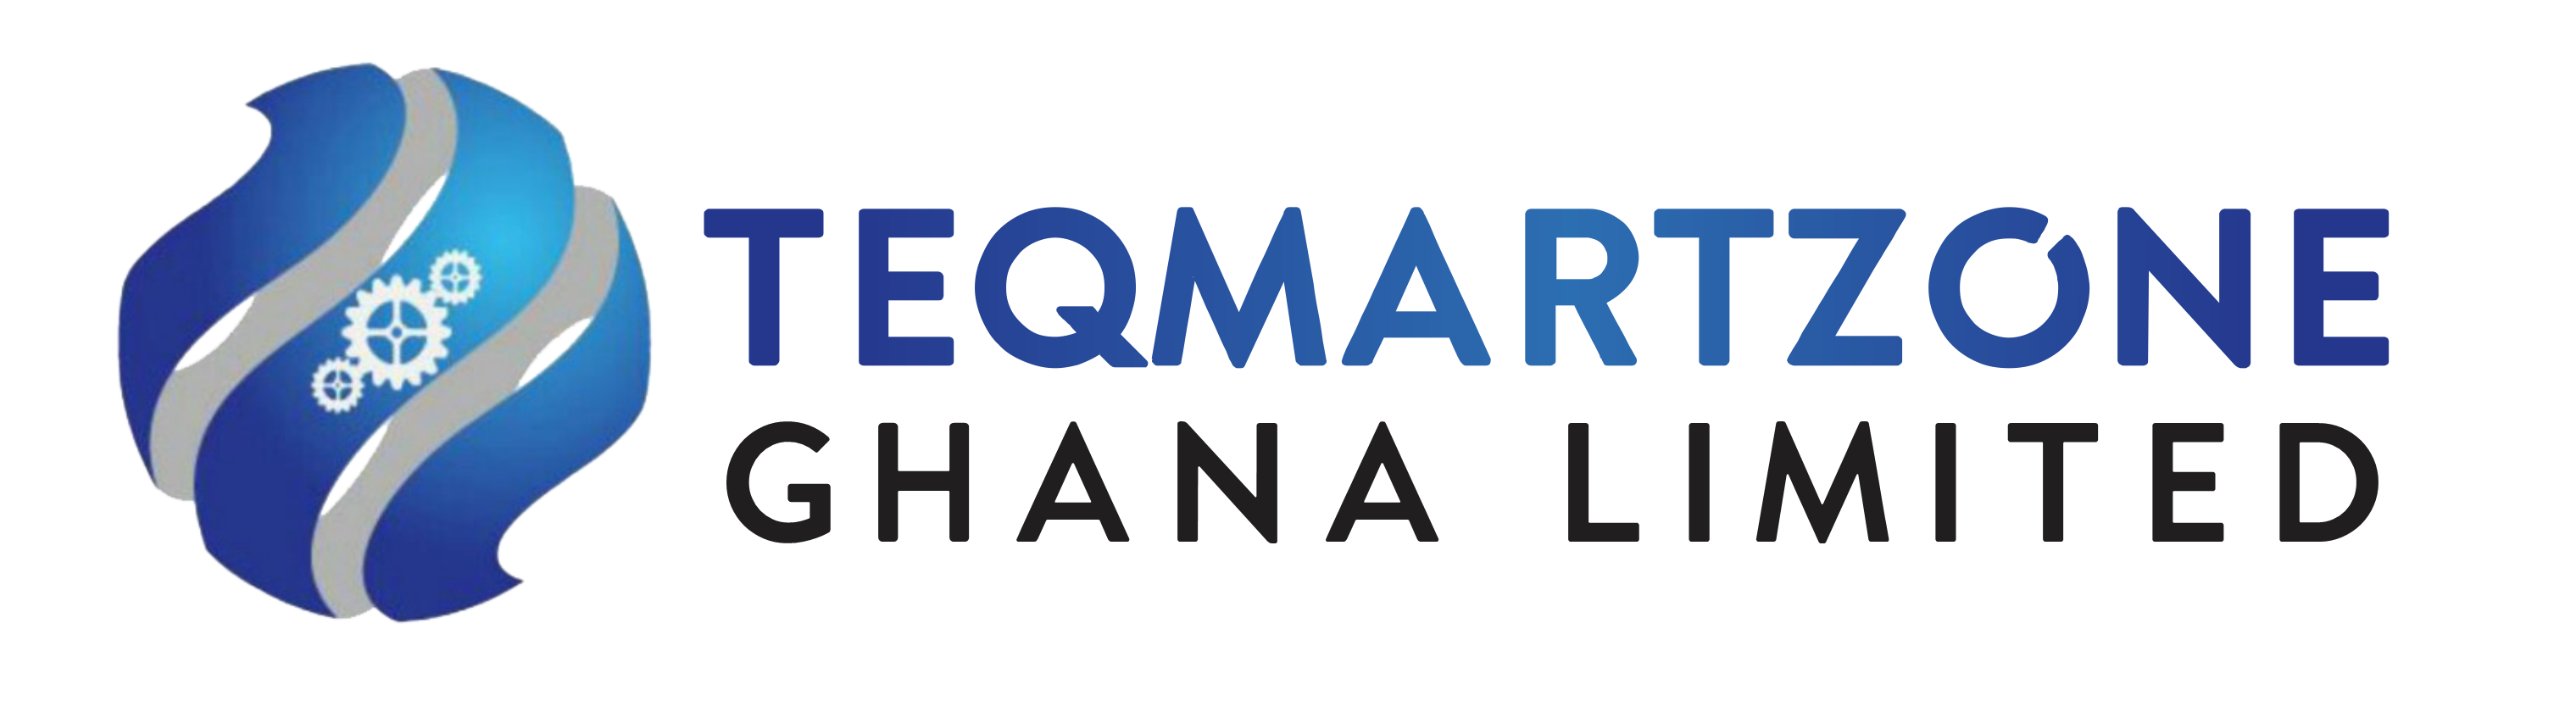 Teqmartzone Ghana Limited - Buy all your Laptops and Gadgets in Ghana